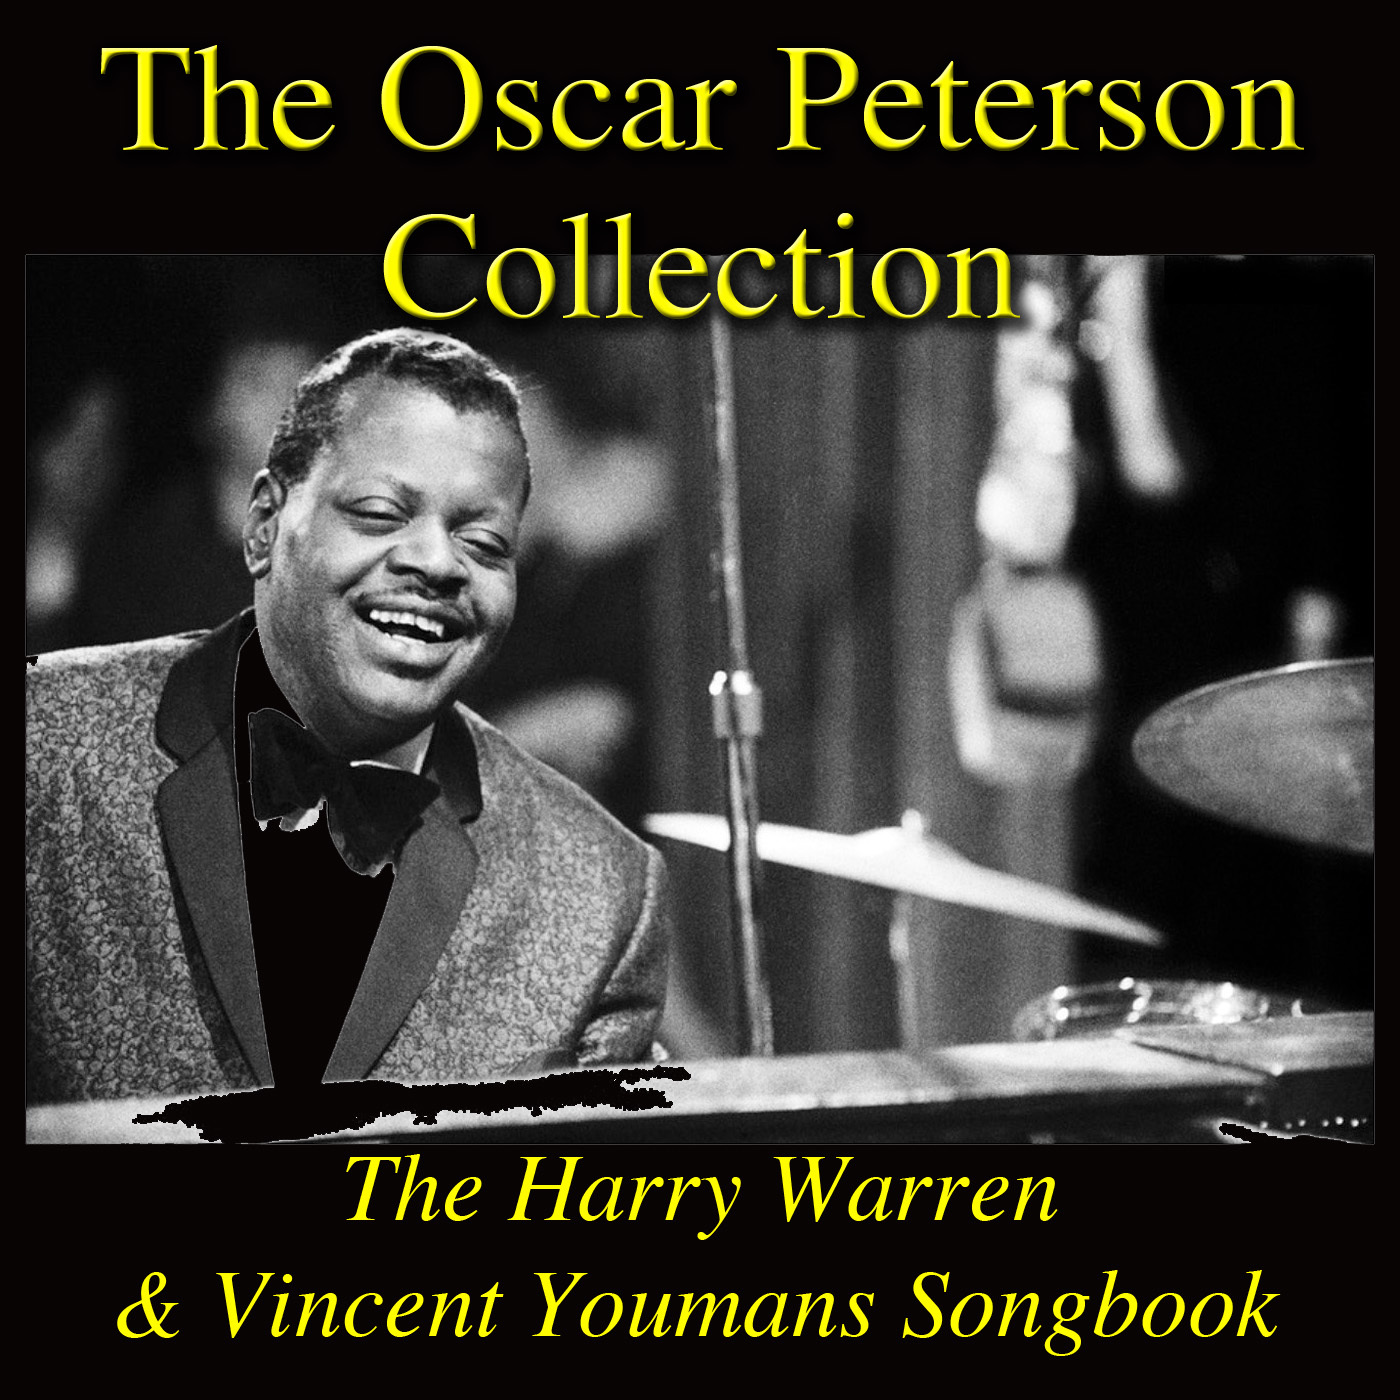 The Oscar Peterson Collection: The Harry Warren & Vincent Youmans Songbook